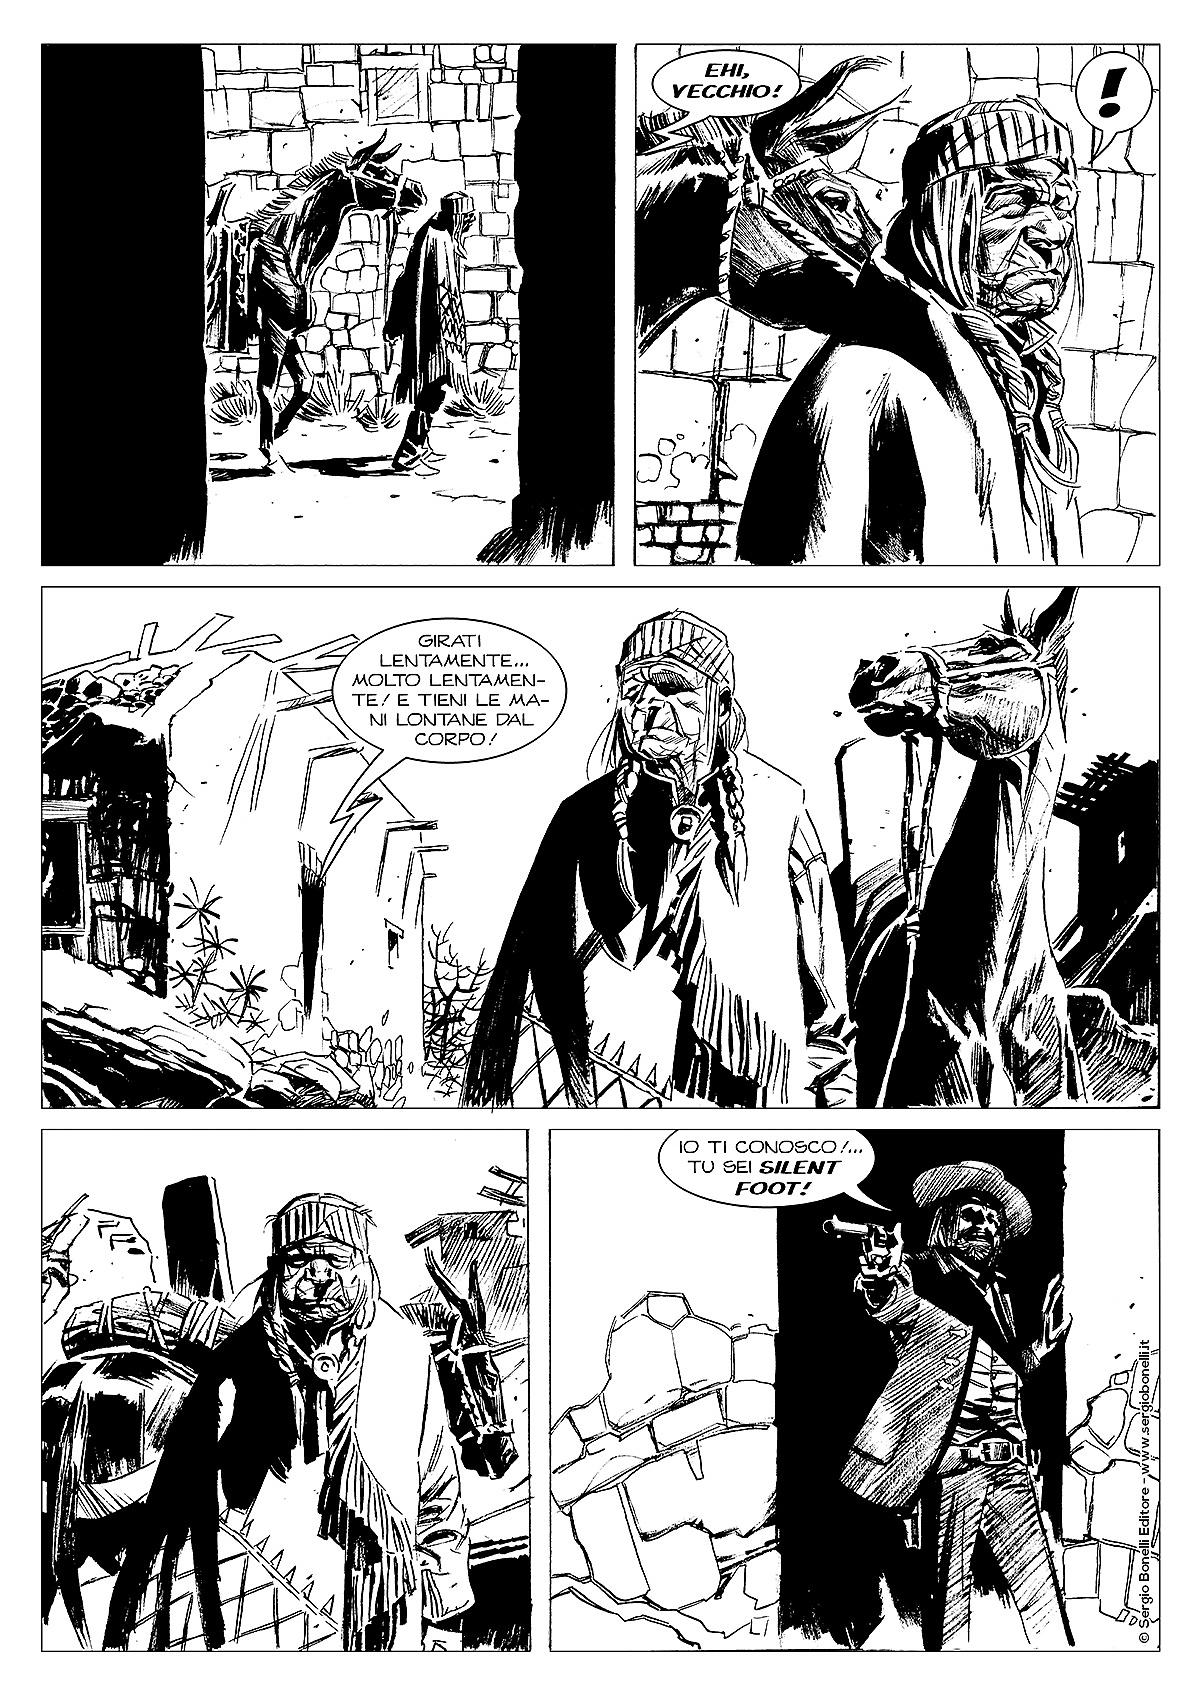 Tex Albo Speciale #36 - art by art by Massimo Carnevale